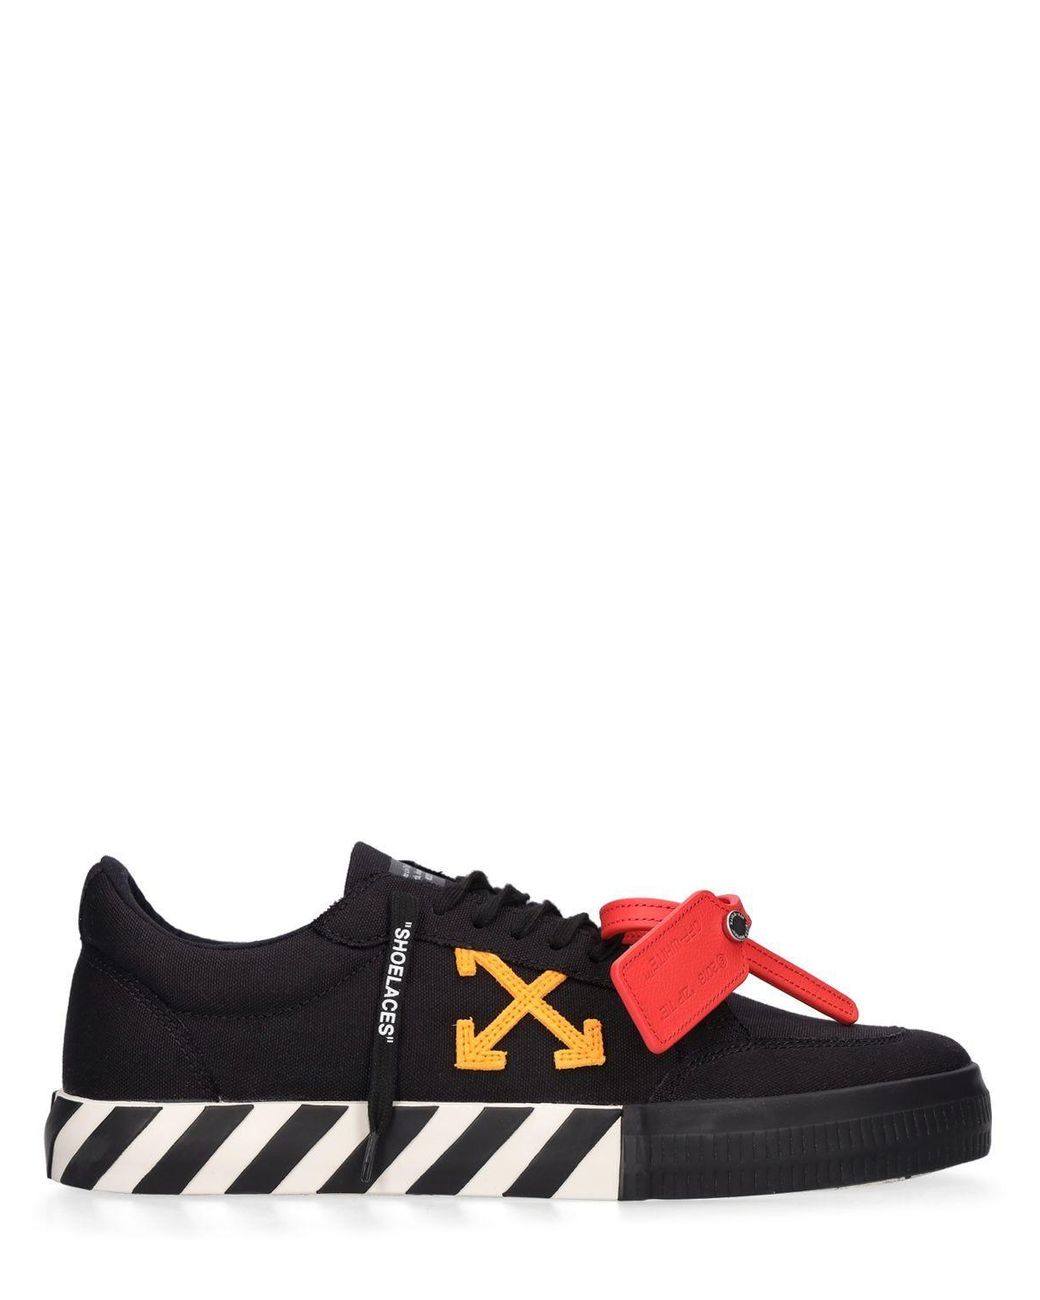 Off-White c/o Virgil Abloh Low Vulcanized Cotton Canvas Sneakers in ...